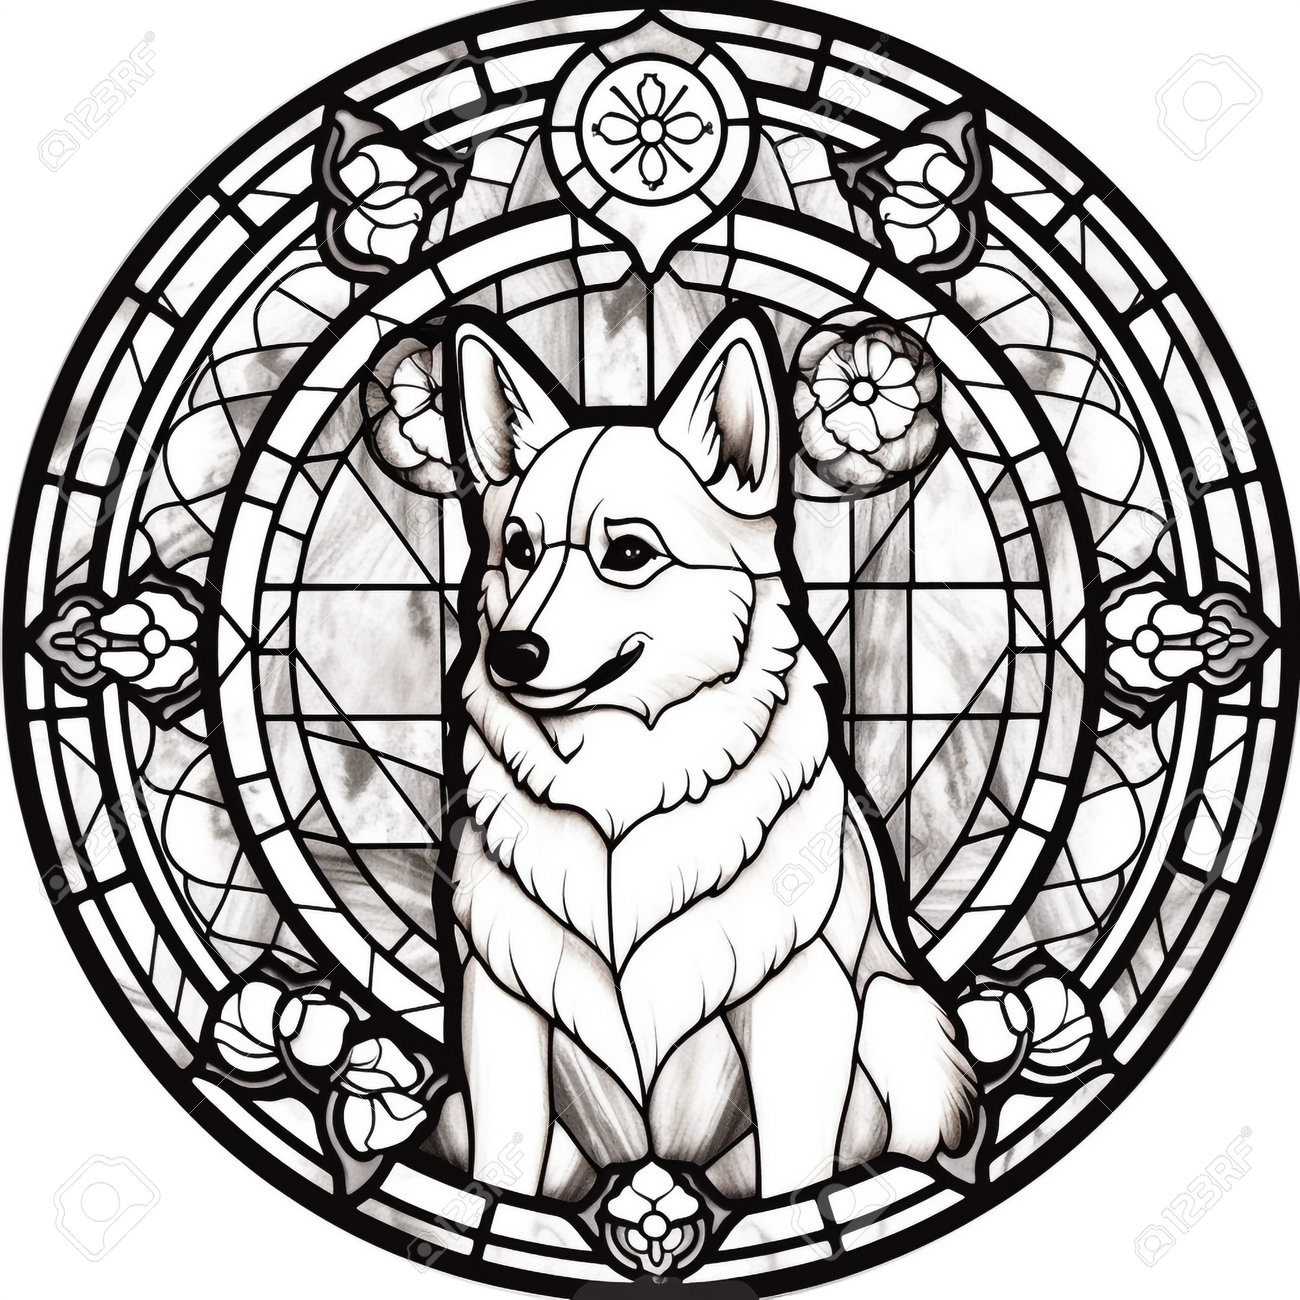 Stained glass dog coloring pages stock photo picture and royalty free image image